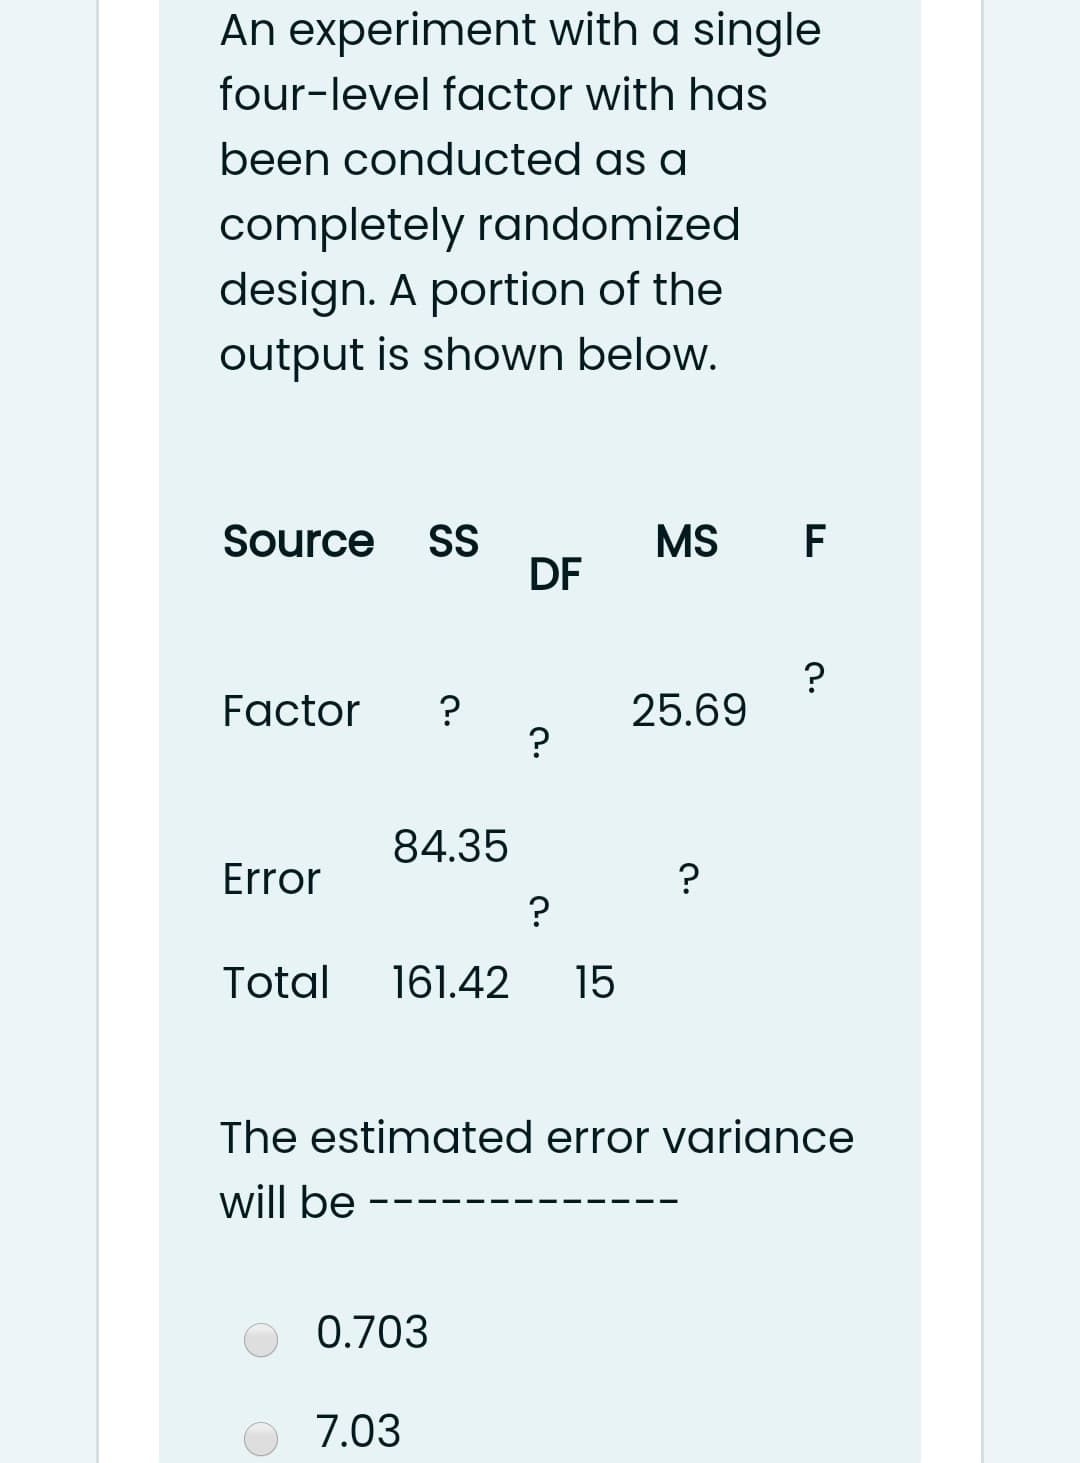 An experiment with a single
four-level factor with has
been conducted as a
completely randomized
design. A portion of the
output is shown below.
SS
DF
Source
MS
F
Factor
?
25.69
84.35
Error
?
Total
161.42
15
The estimated error variance
will be
0.703
O 7.03
